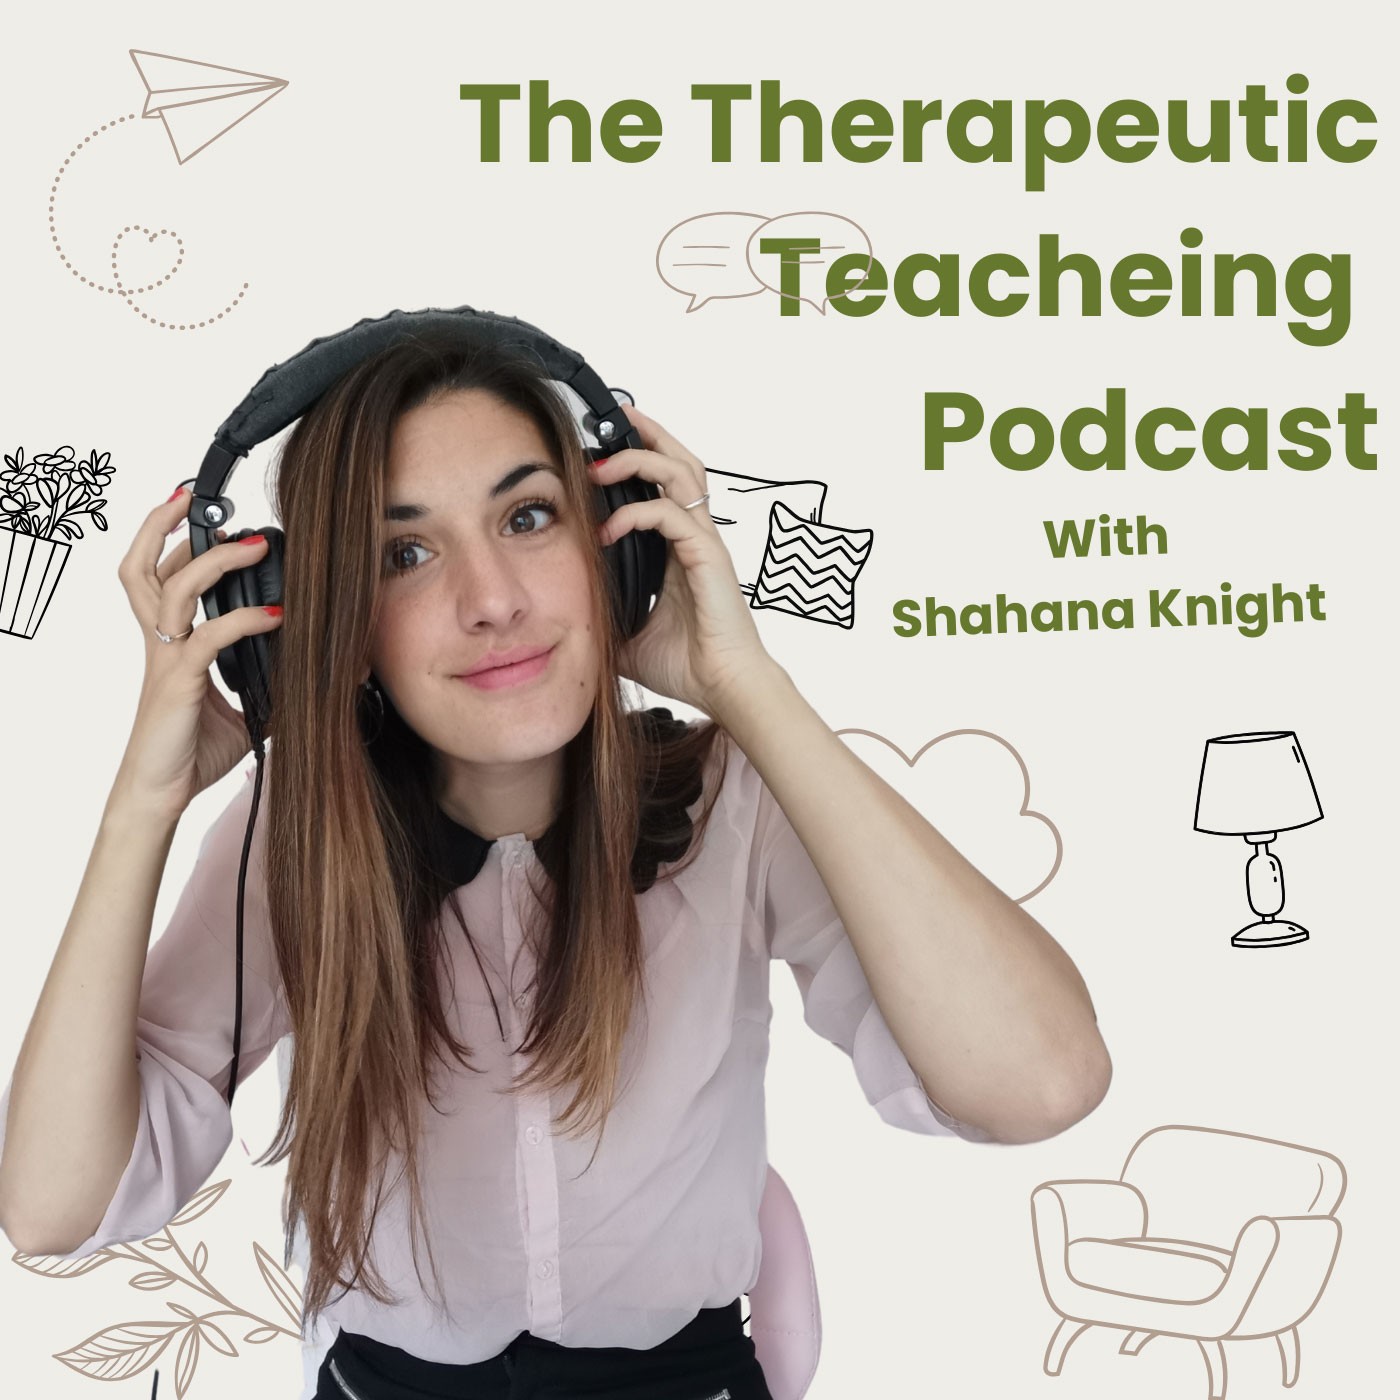 The Therapeutic Teaching Podcast with Shahana Knight